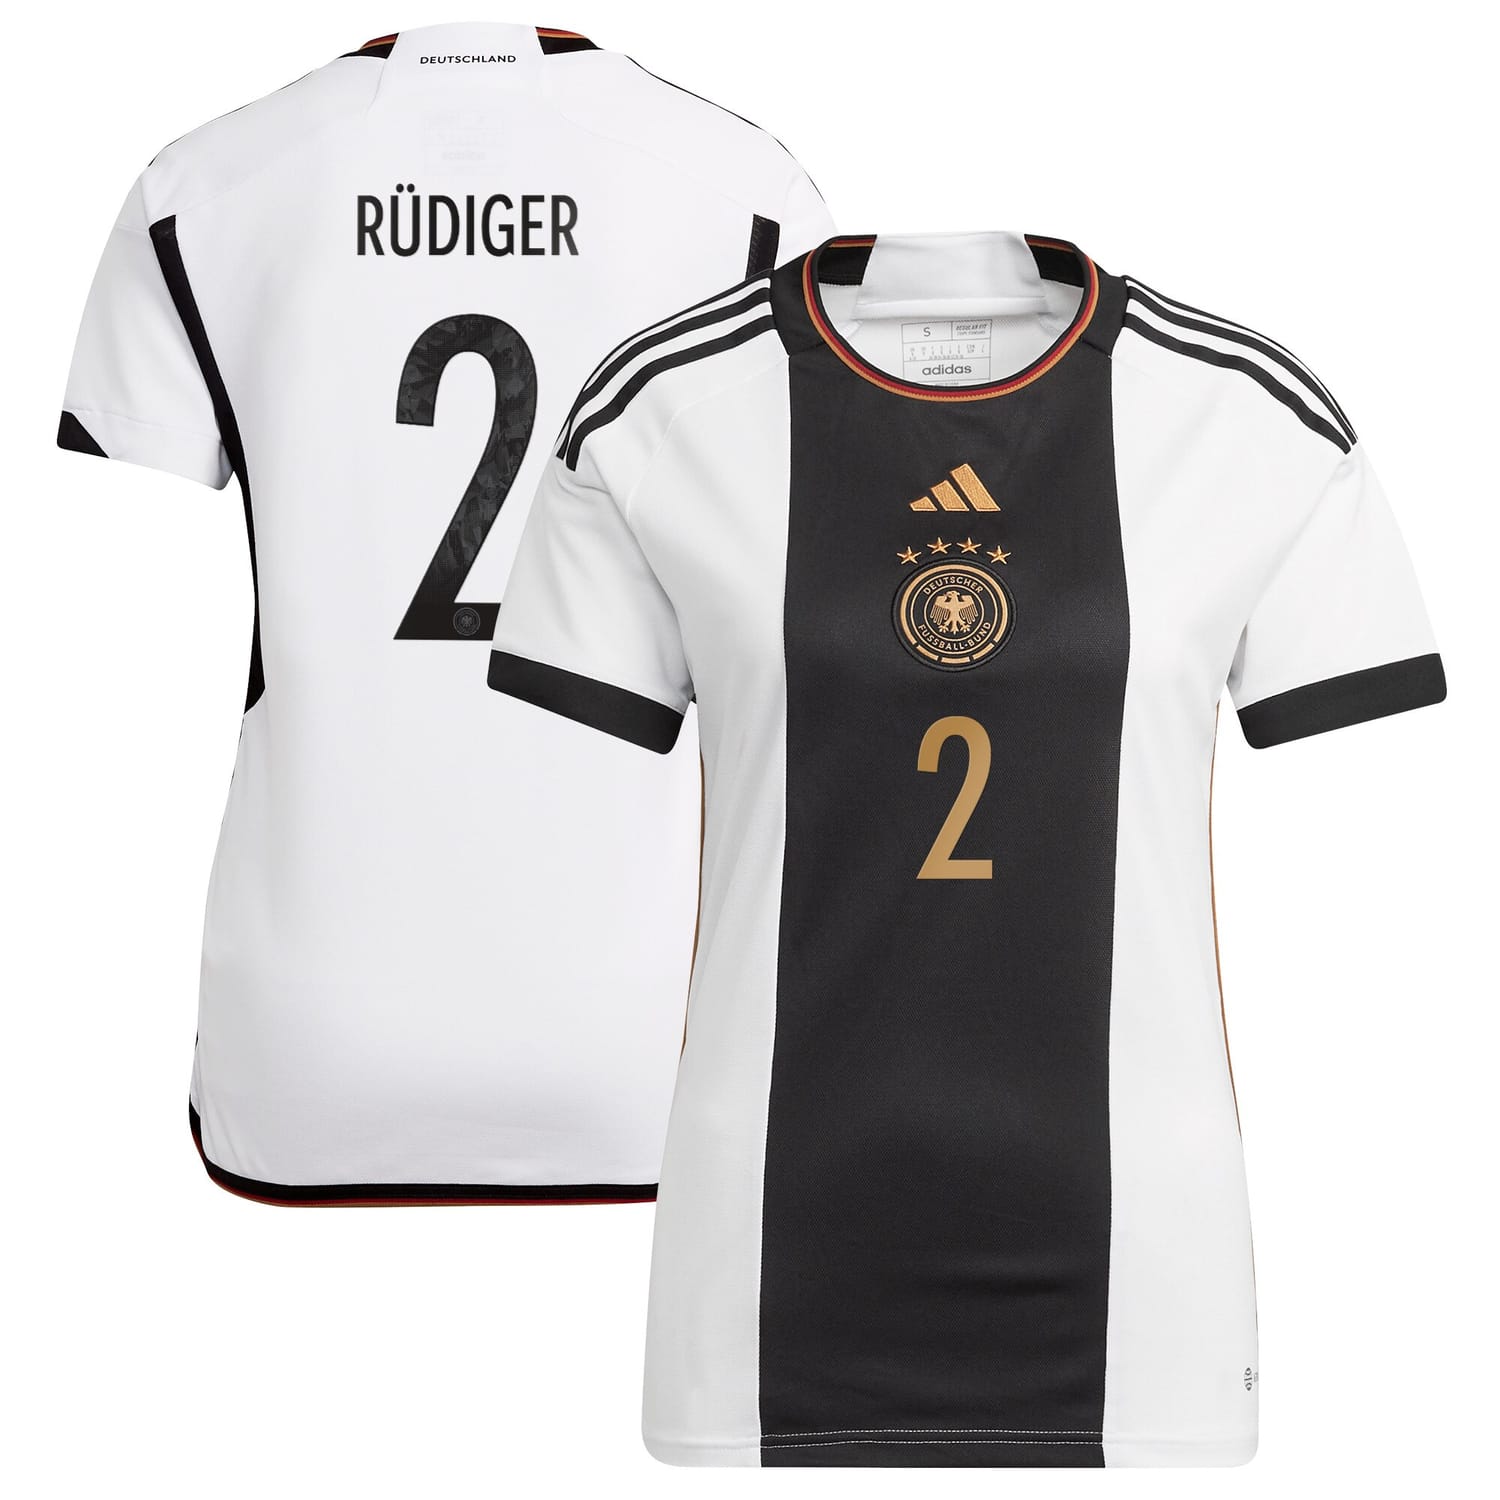 Germany National Team Home Jersey Shirt player Antonio Rüdiger 2 printing for Women